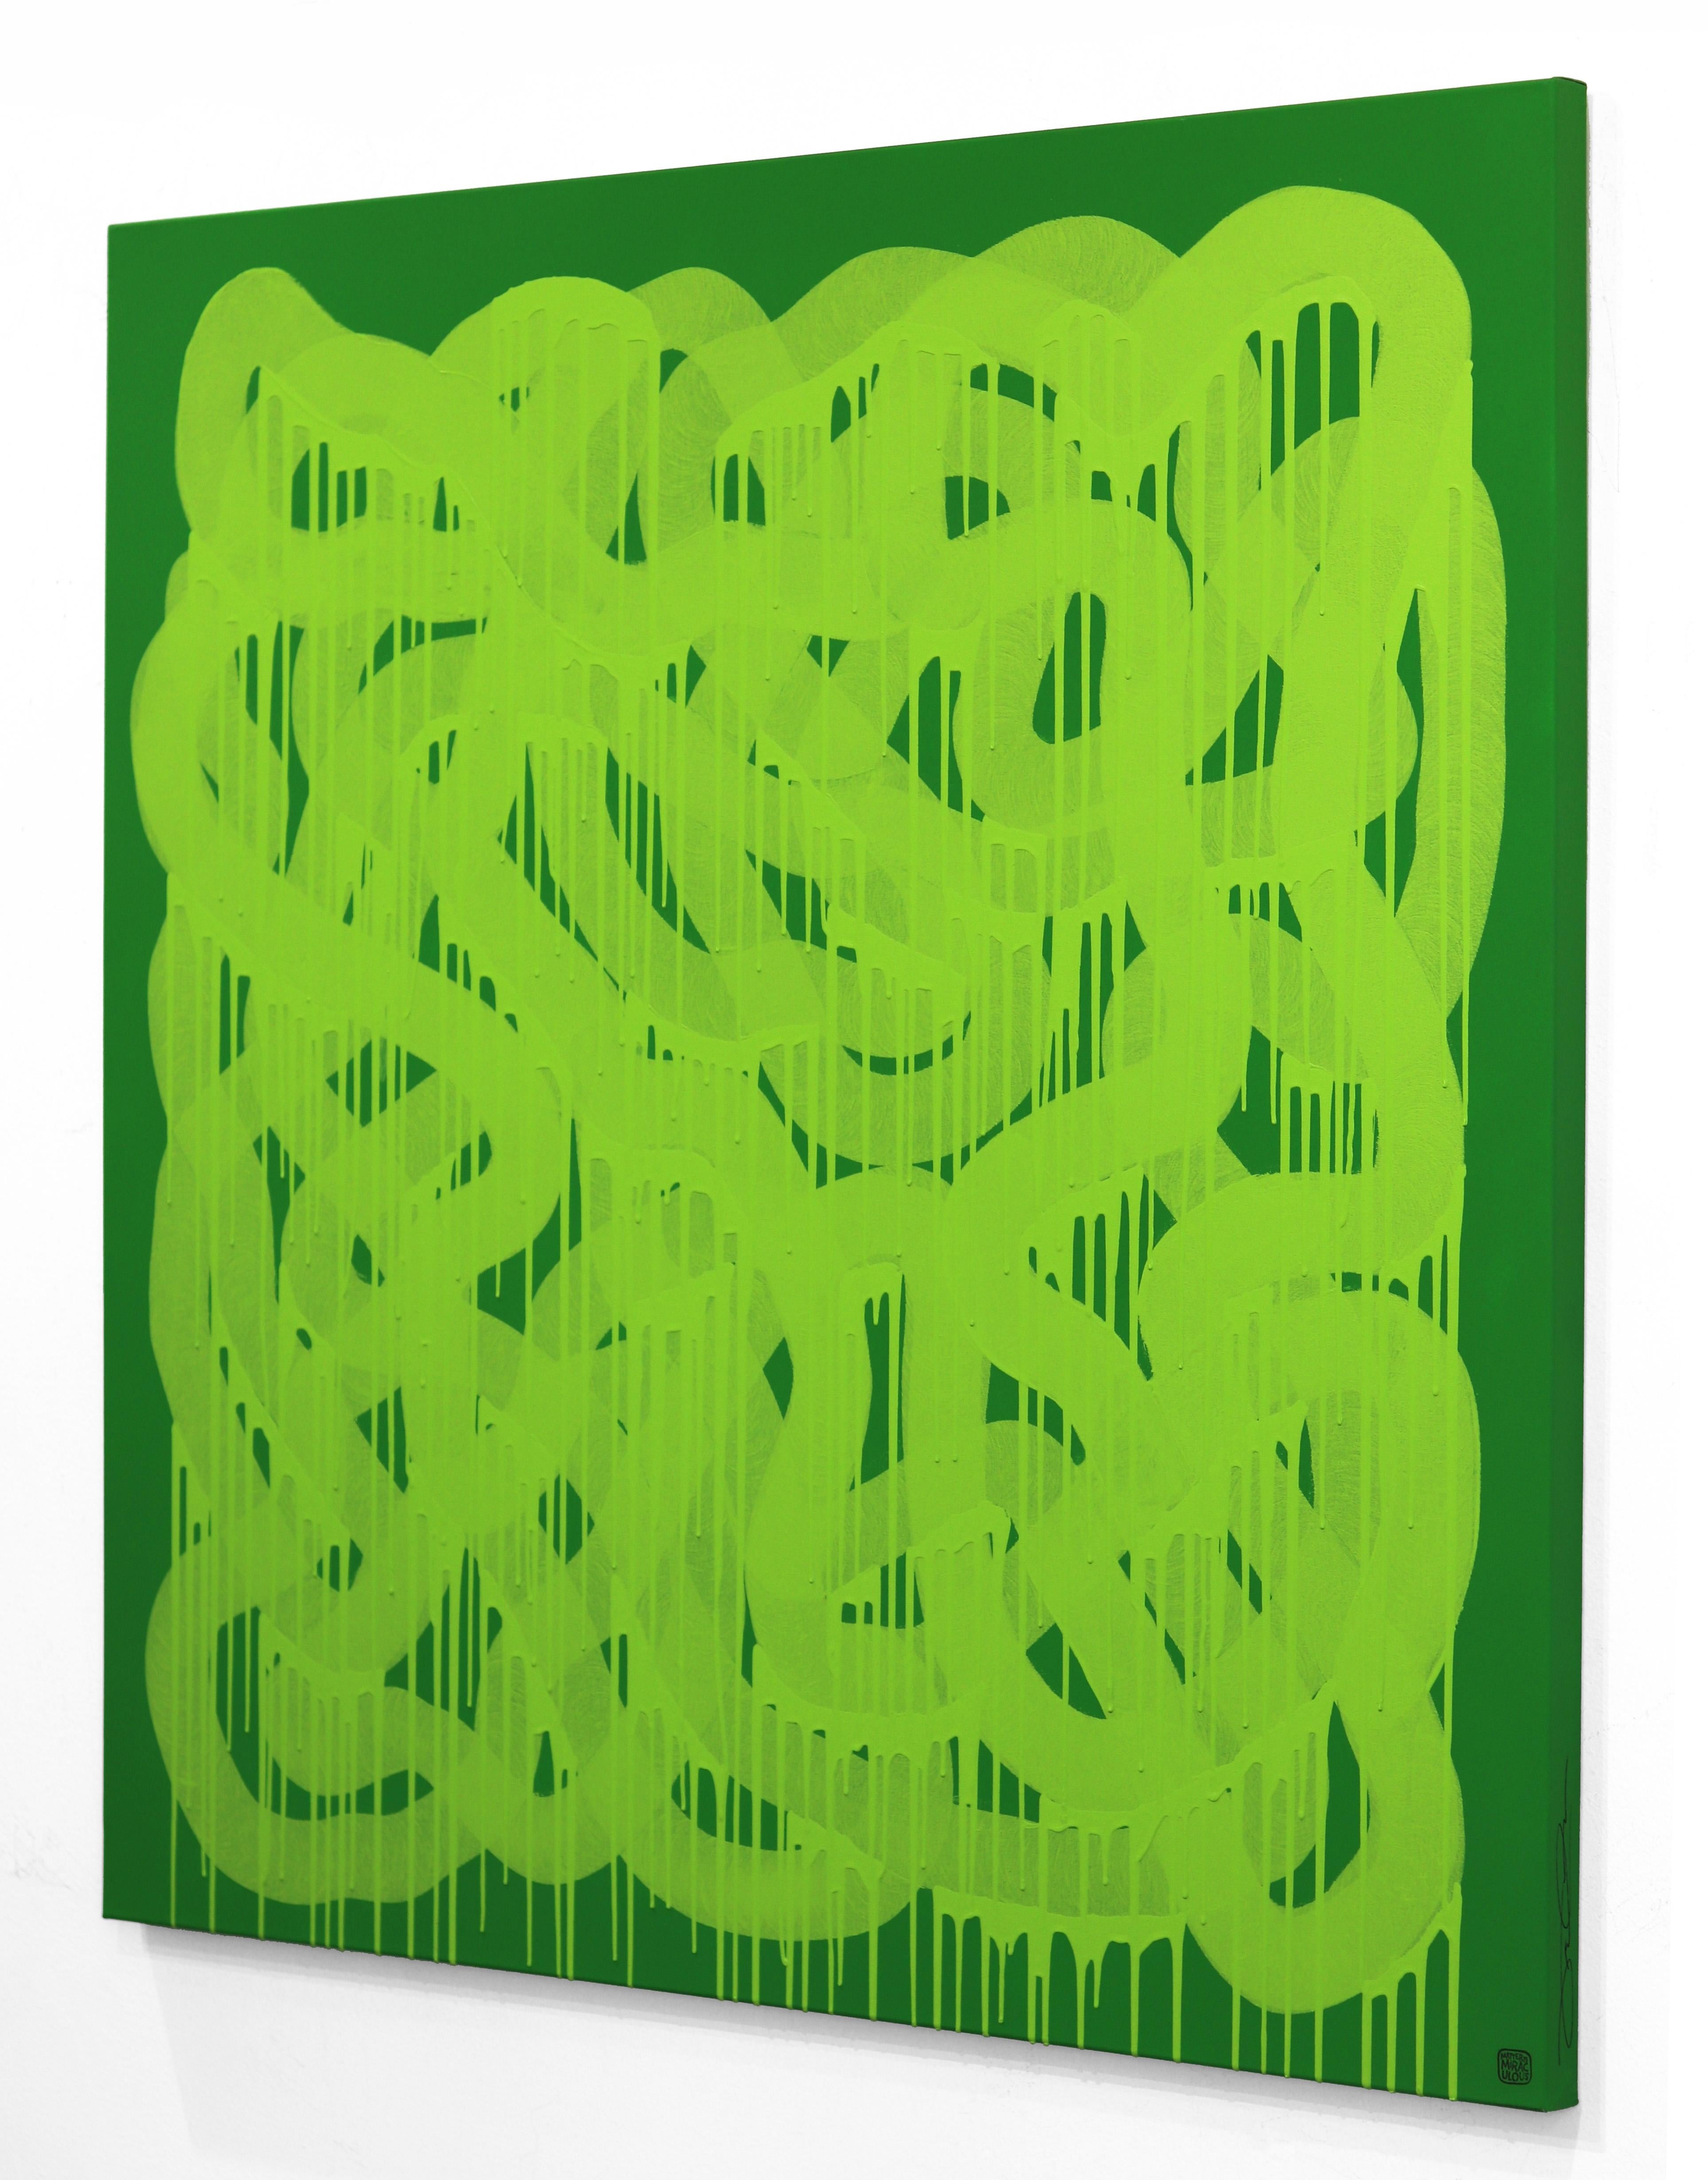 Fruity Ramen: Slime You Out - Green on Green Graffiti Painting on Canvas For Sale 1